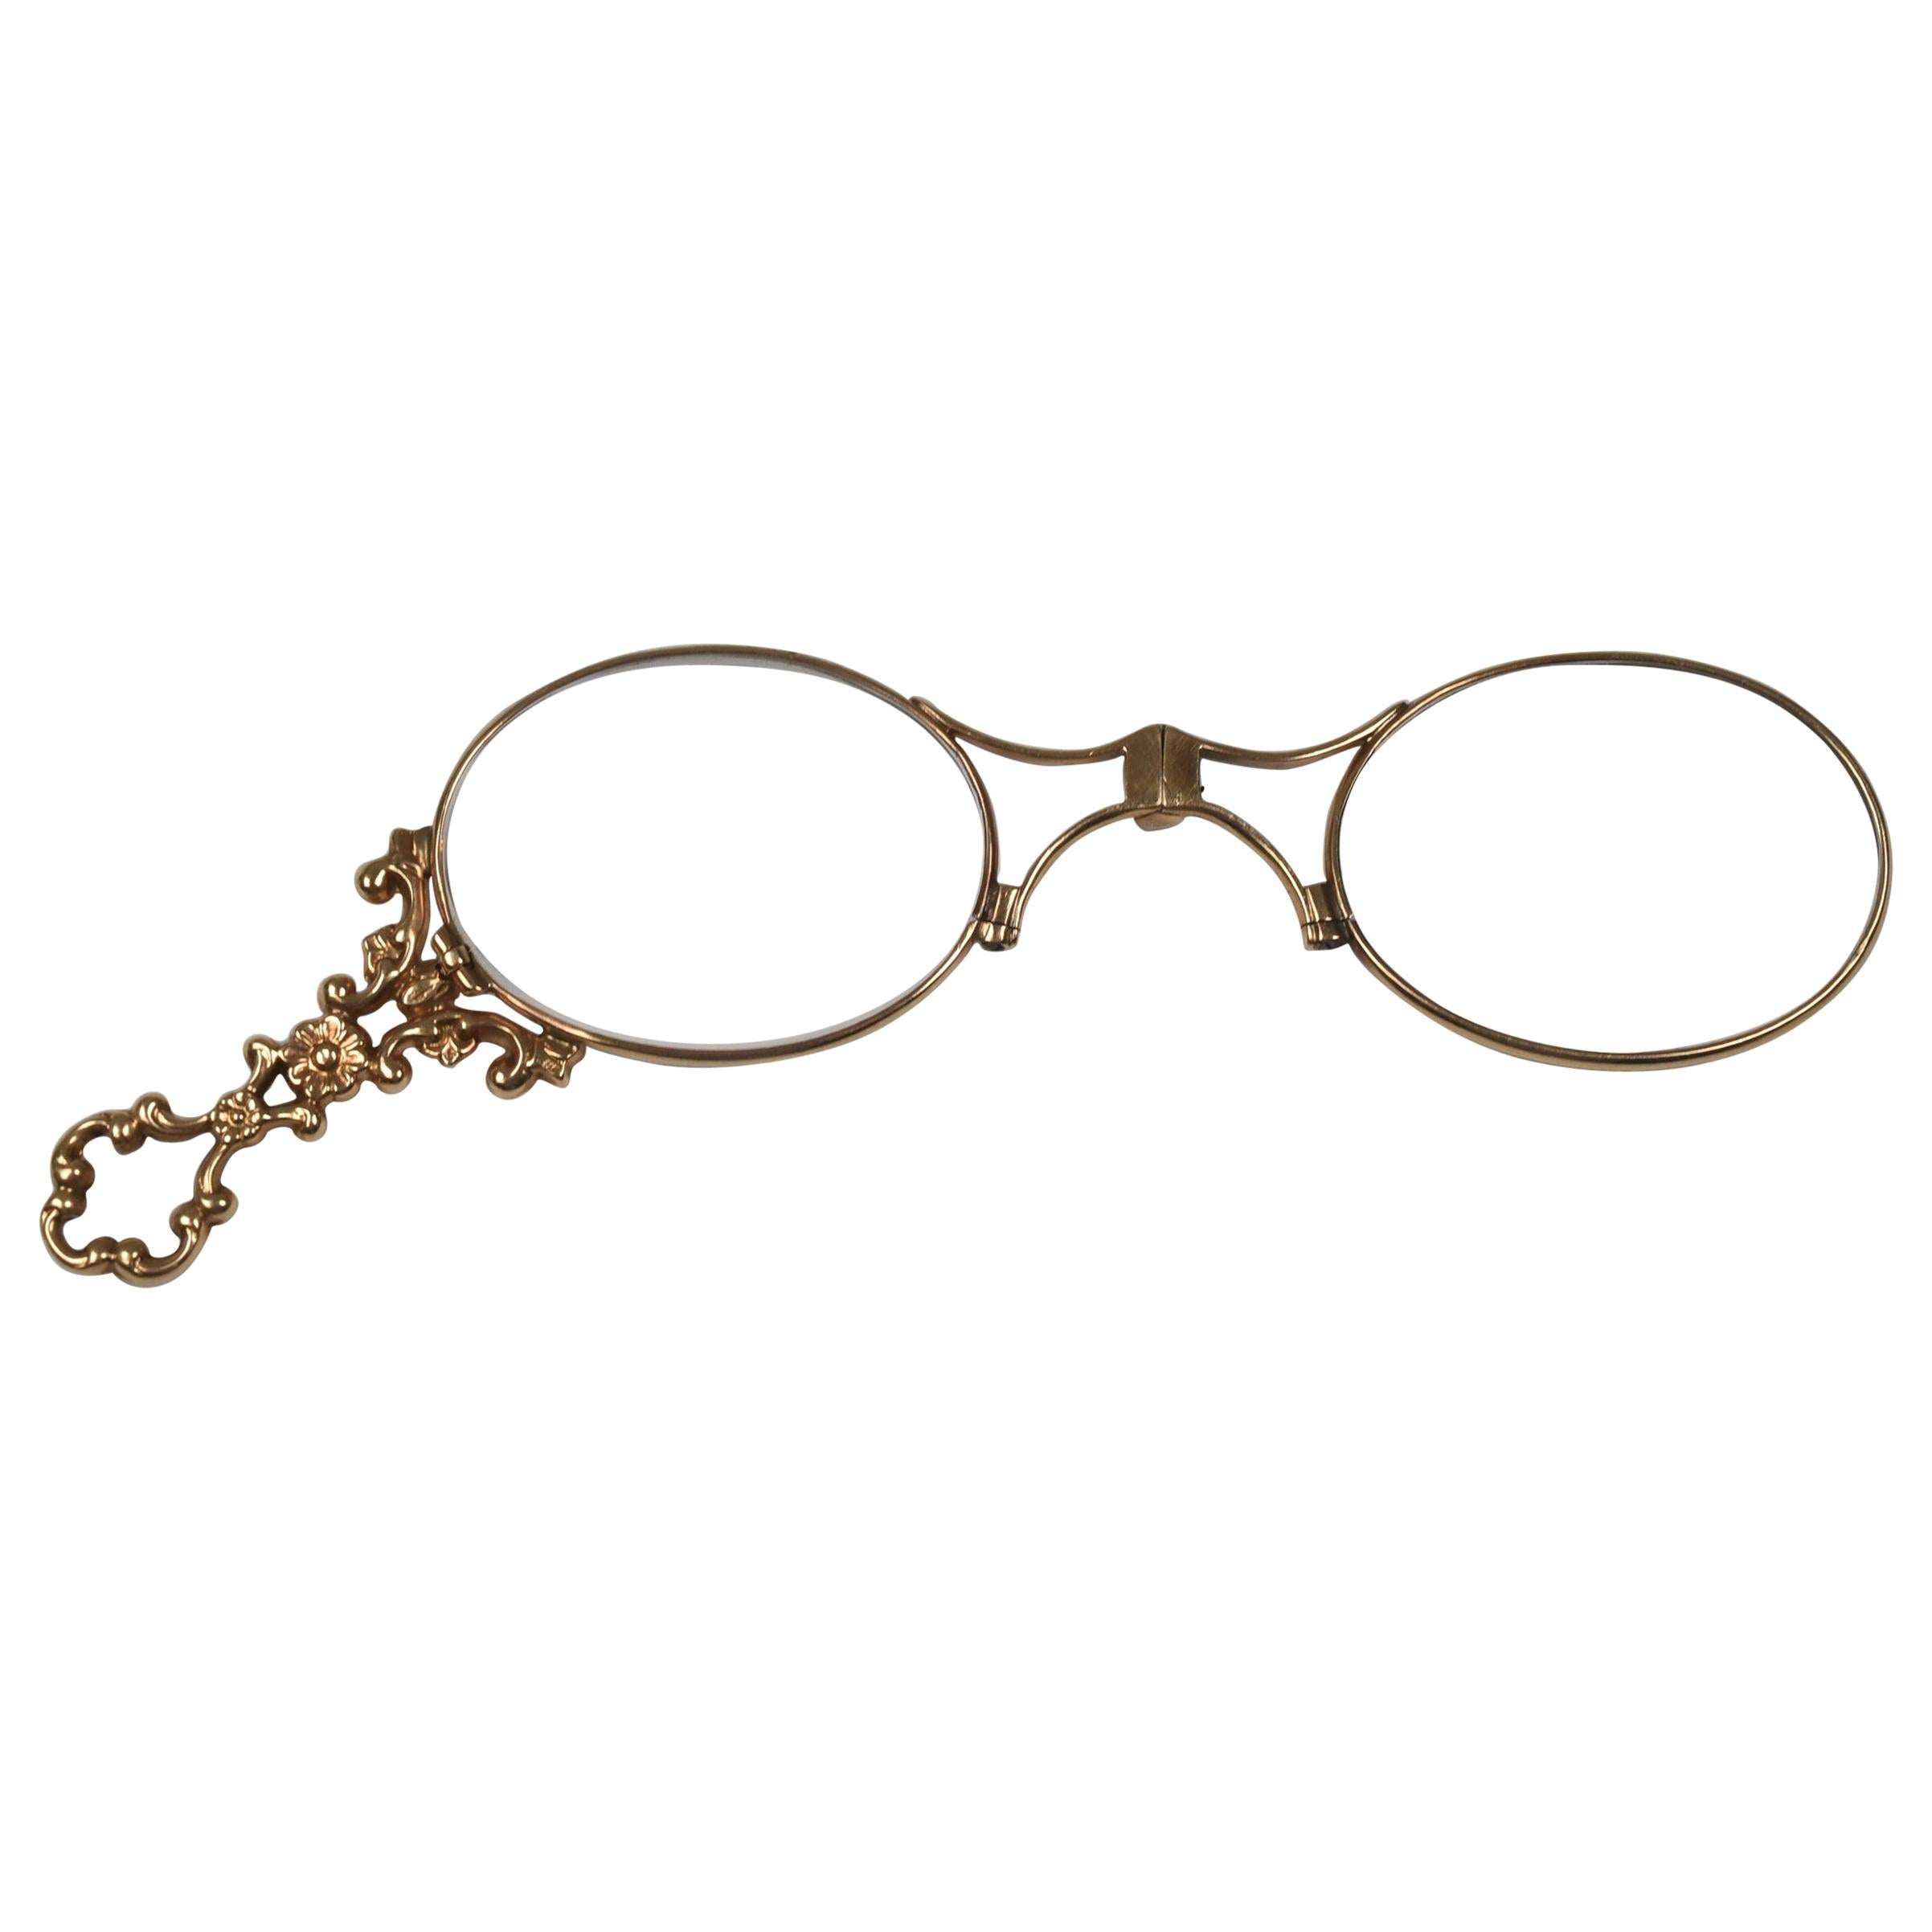 14-Carat Yellow Gold Ladies Lorgnette Vintage Spectacles For Sale